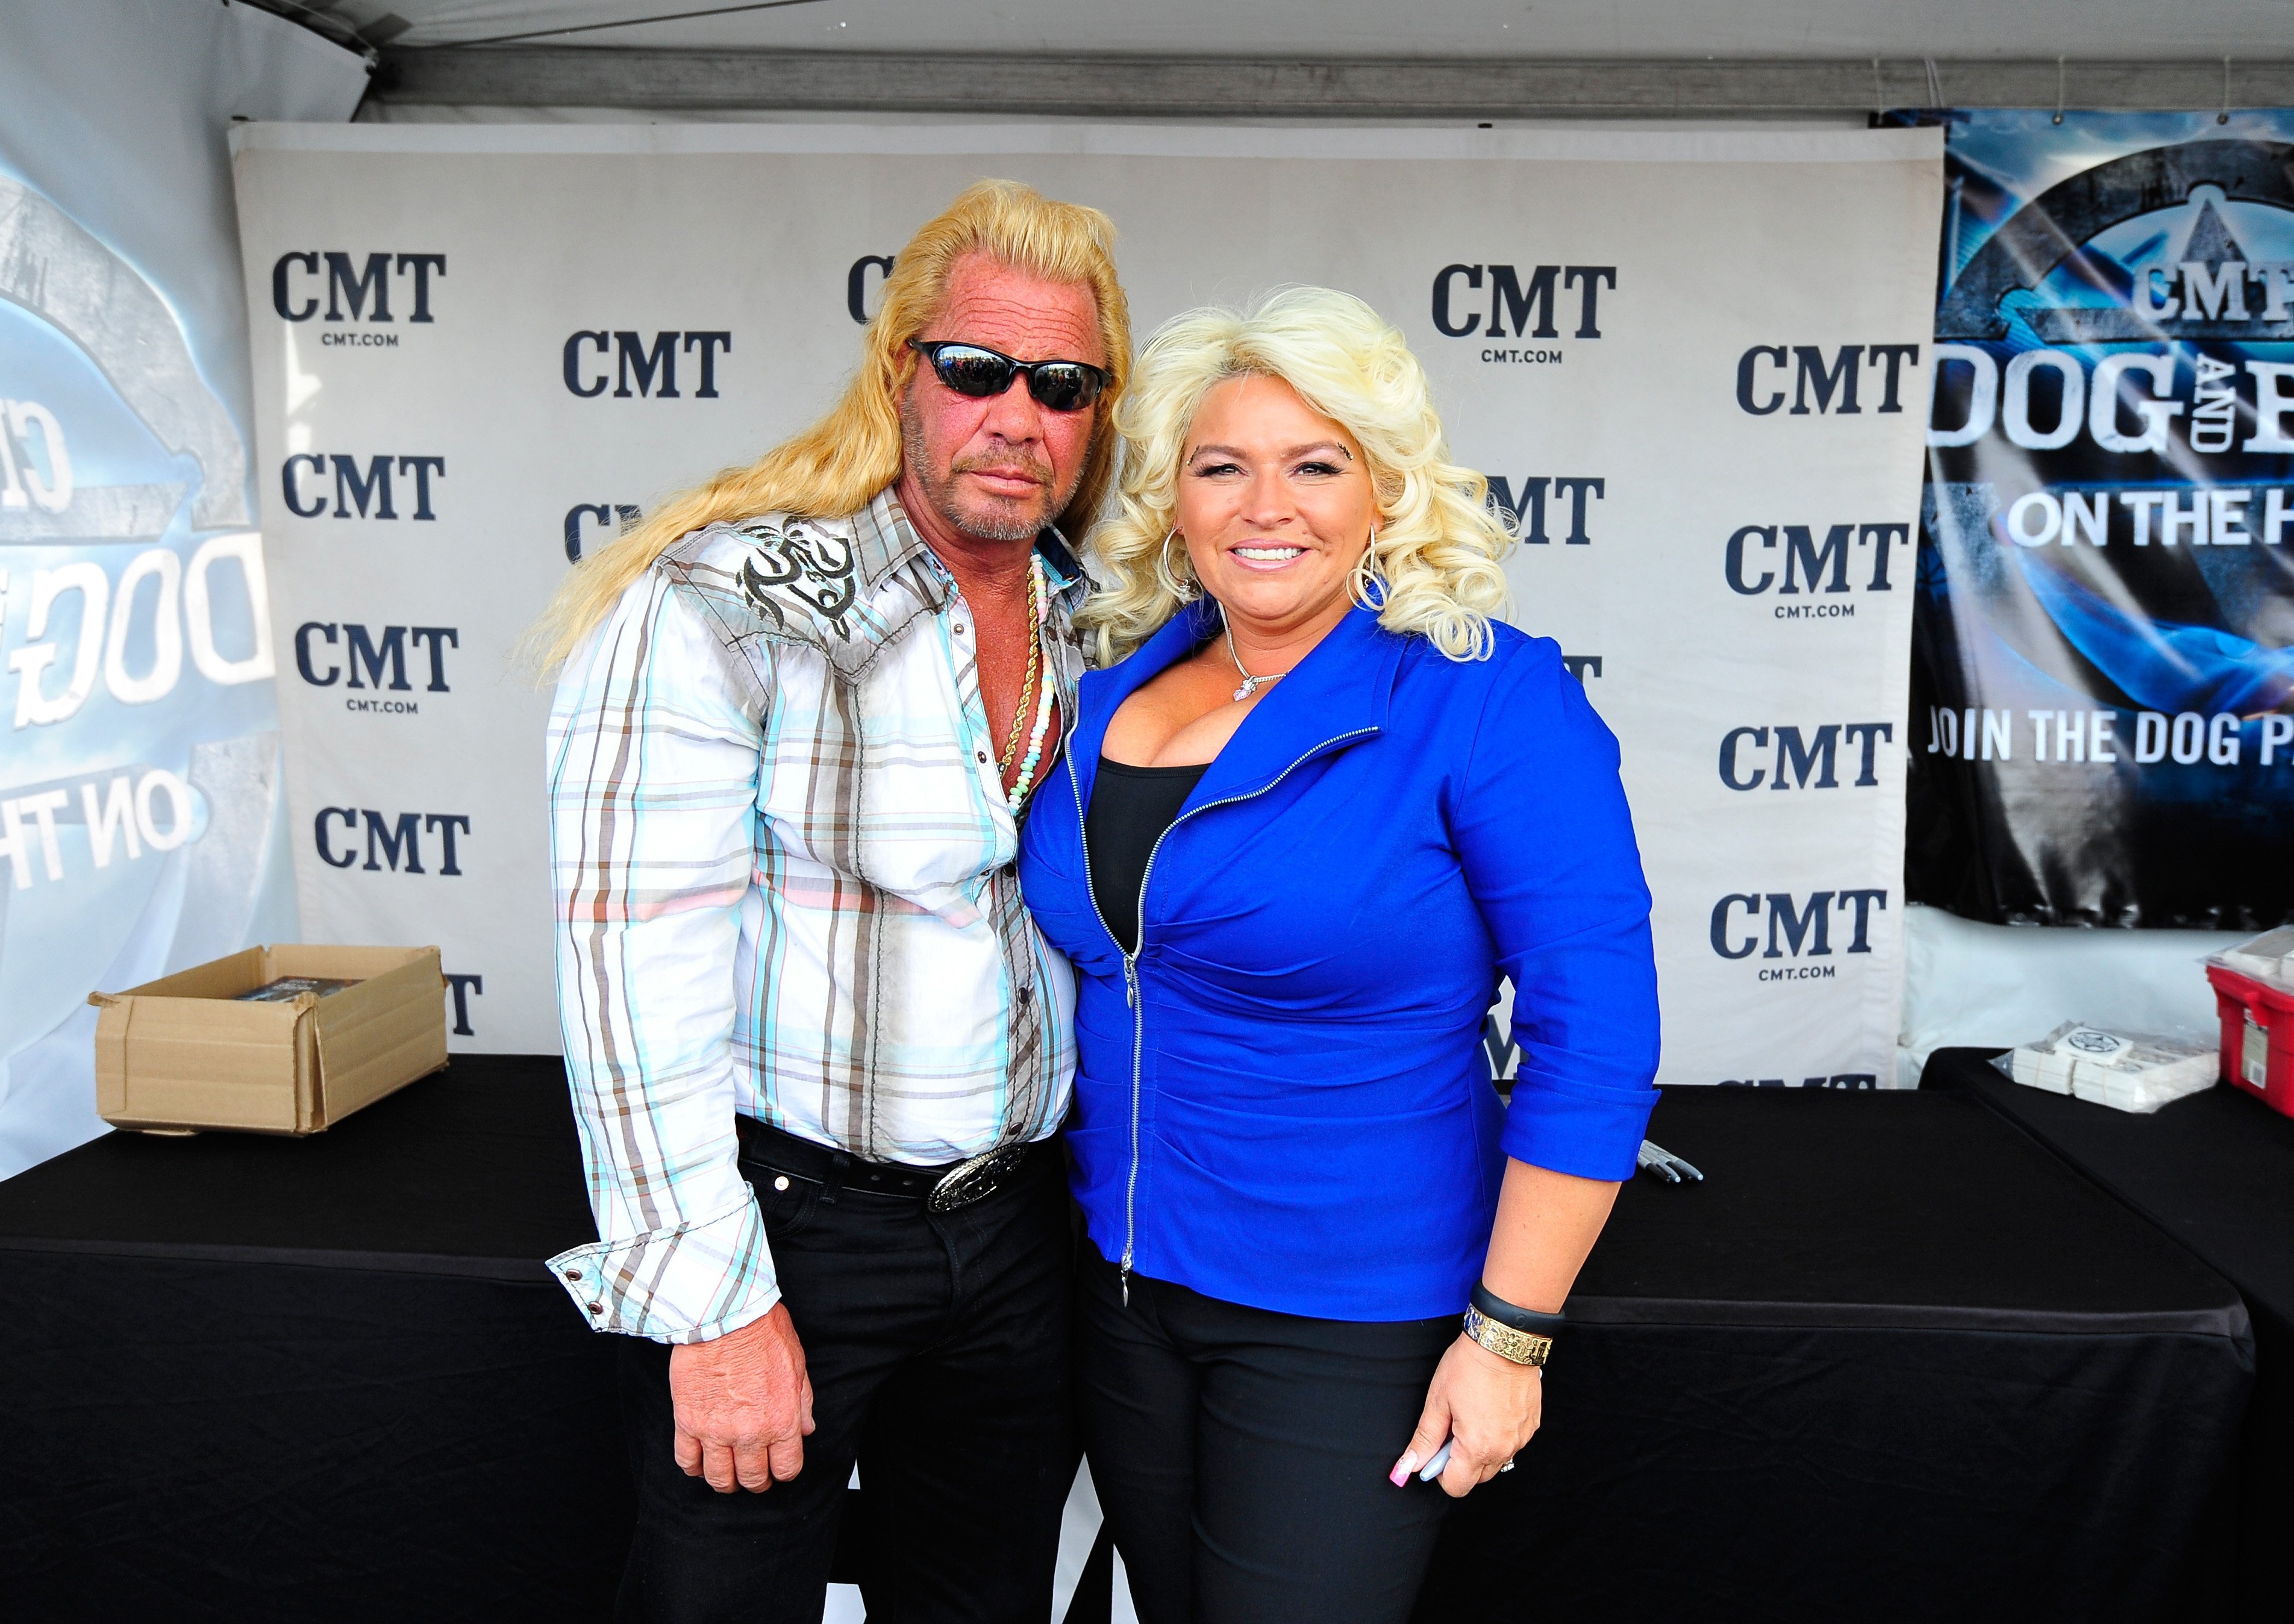 Duane "Dog" and Beth Chapman at the ACM Experience during the 48th Annual Academy of Country Music Awards at the Orleans Arena on April 5, 2013 in Las Vegas, Nevada | Photo: Getty Images